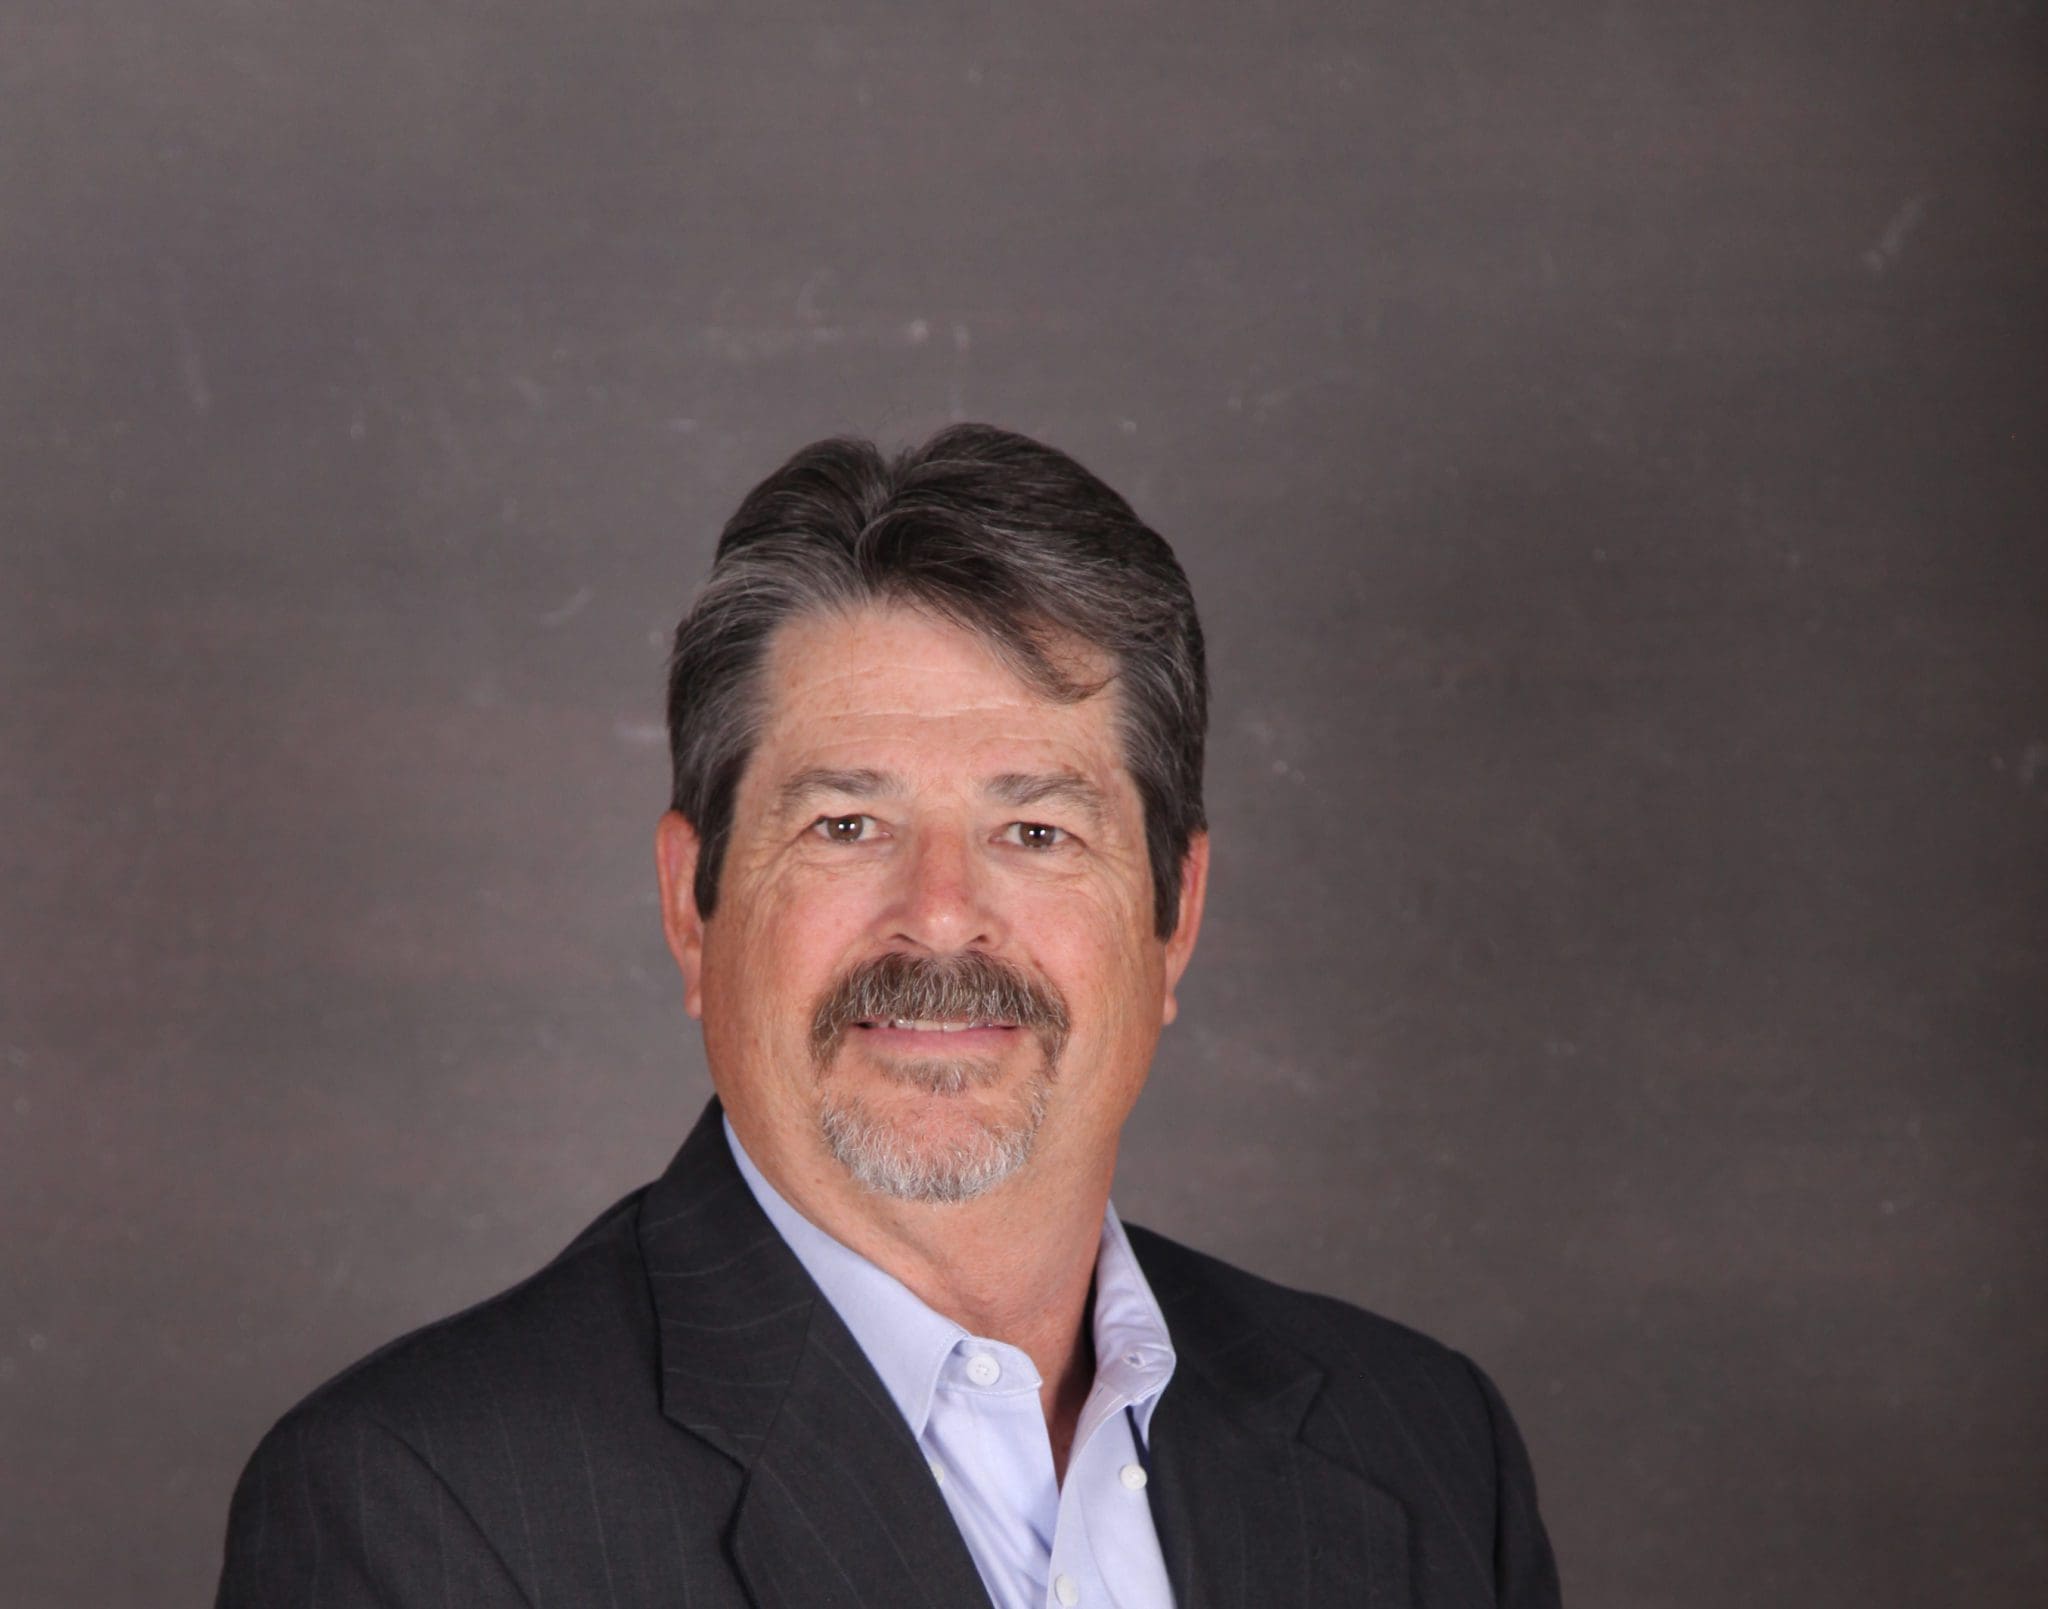 BCCK Holding Company (BCCK), a leader in engineering, procurement, fabrication and field construction services, has appointed Tony Canfield as vice president of engineering